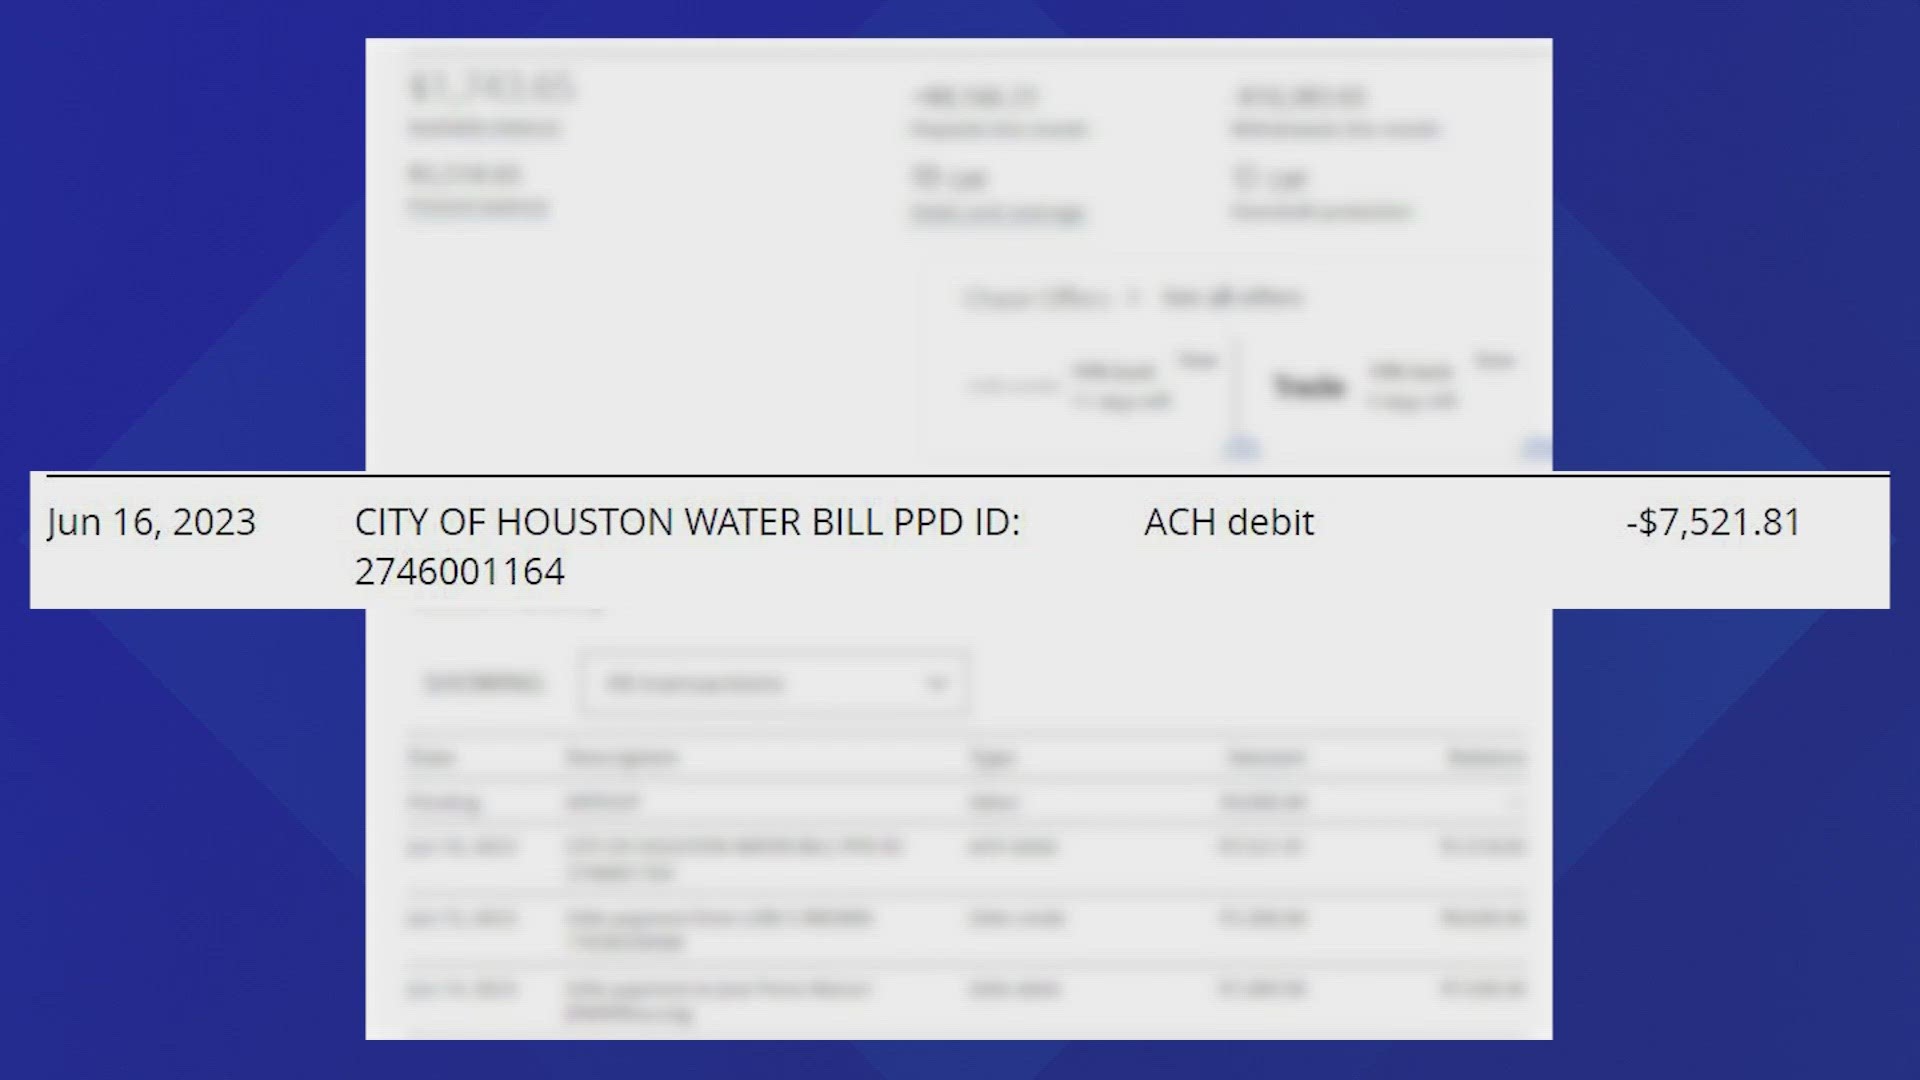 Carl Castoreno said he usually pays about $45 a month for his water bill, but recently, he got one for $7,500.